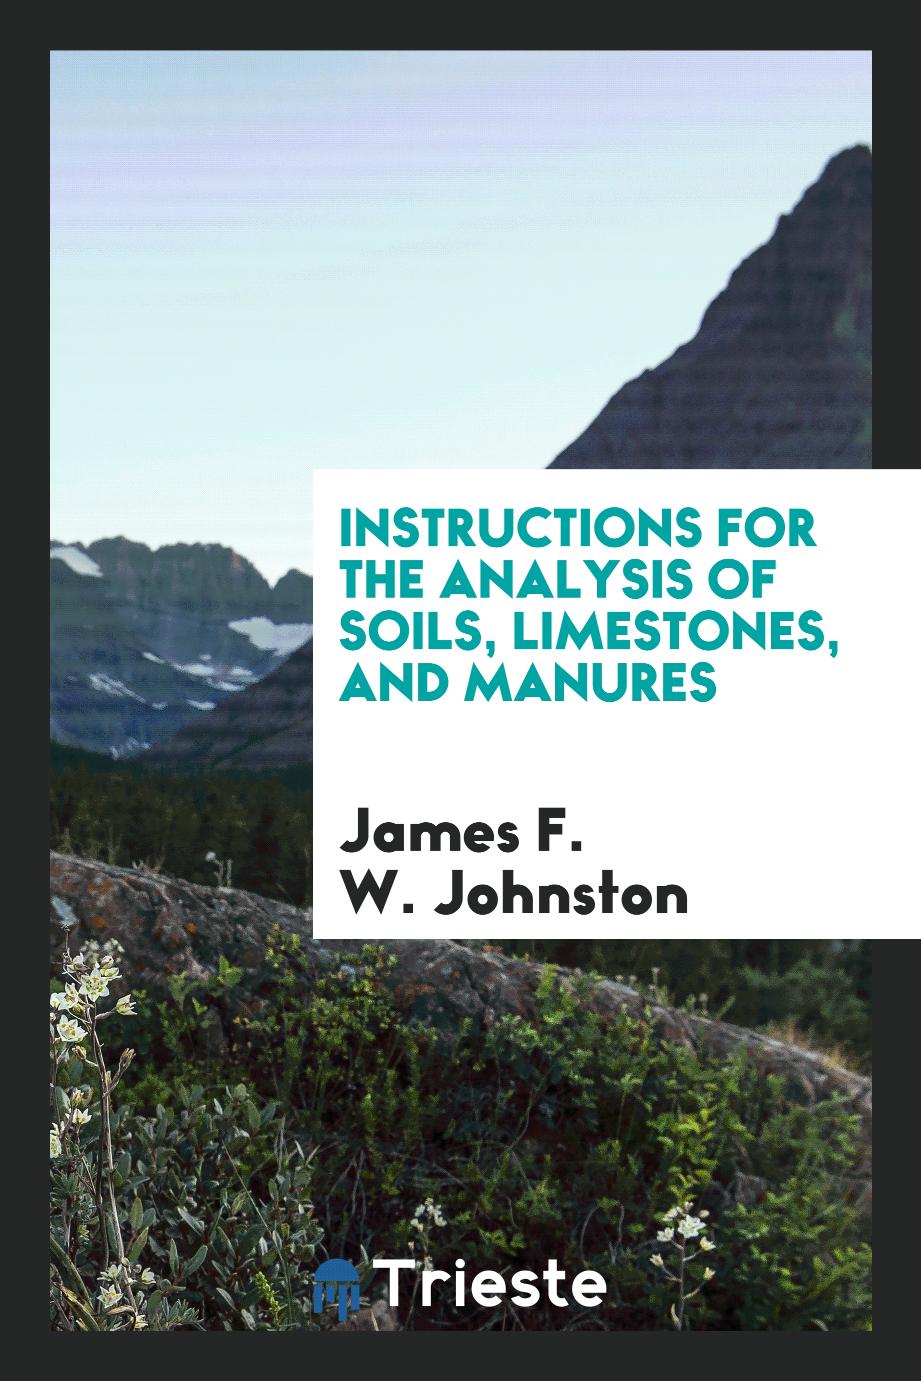 Instructions for the Analysis of Soils, Limestones, and Manures